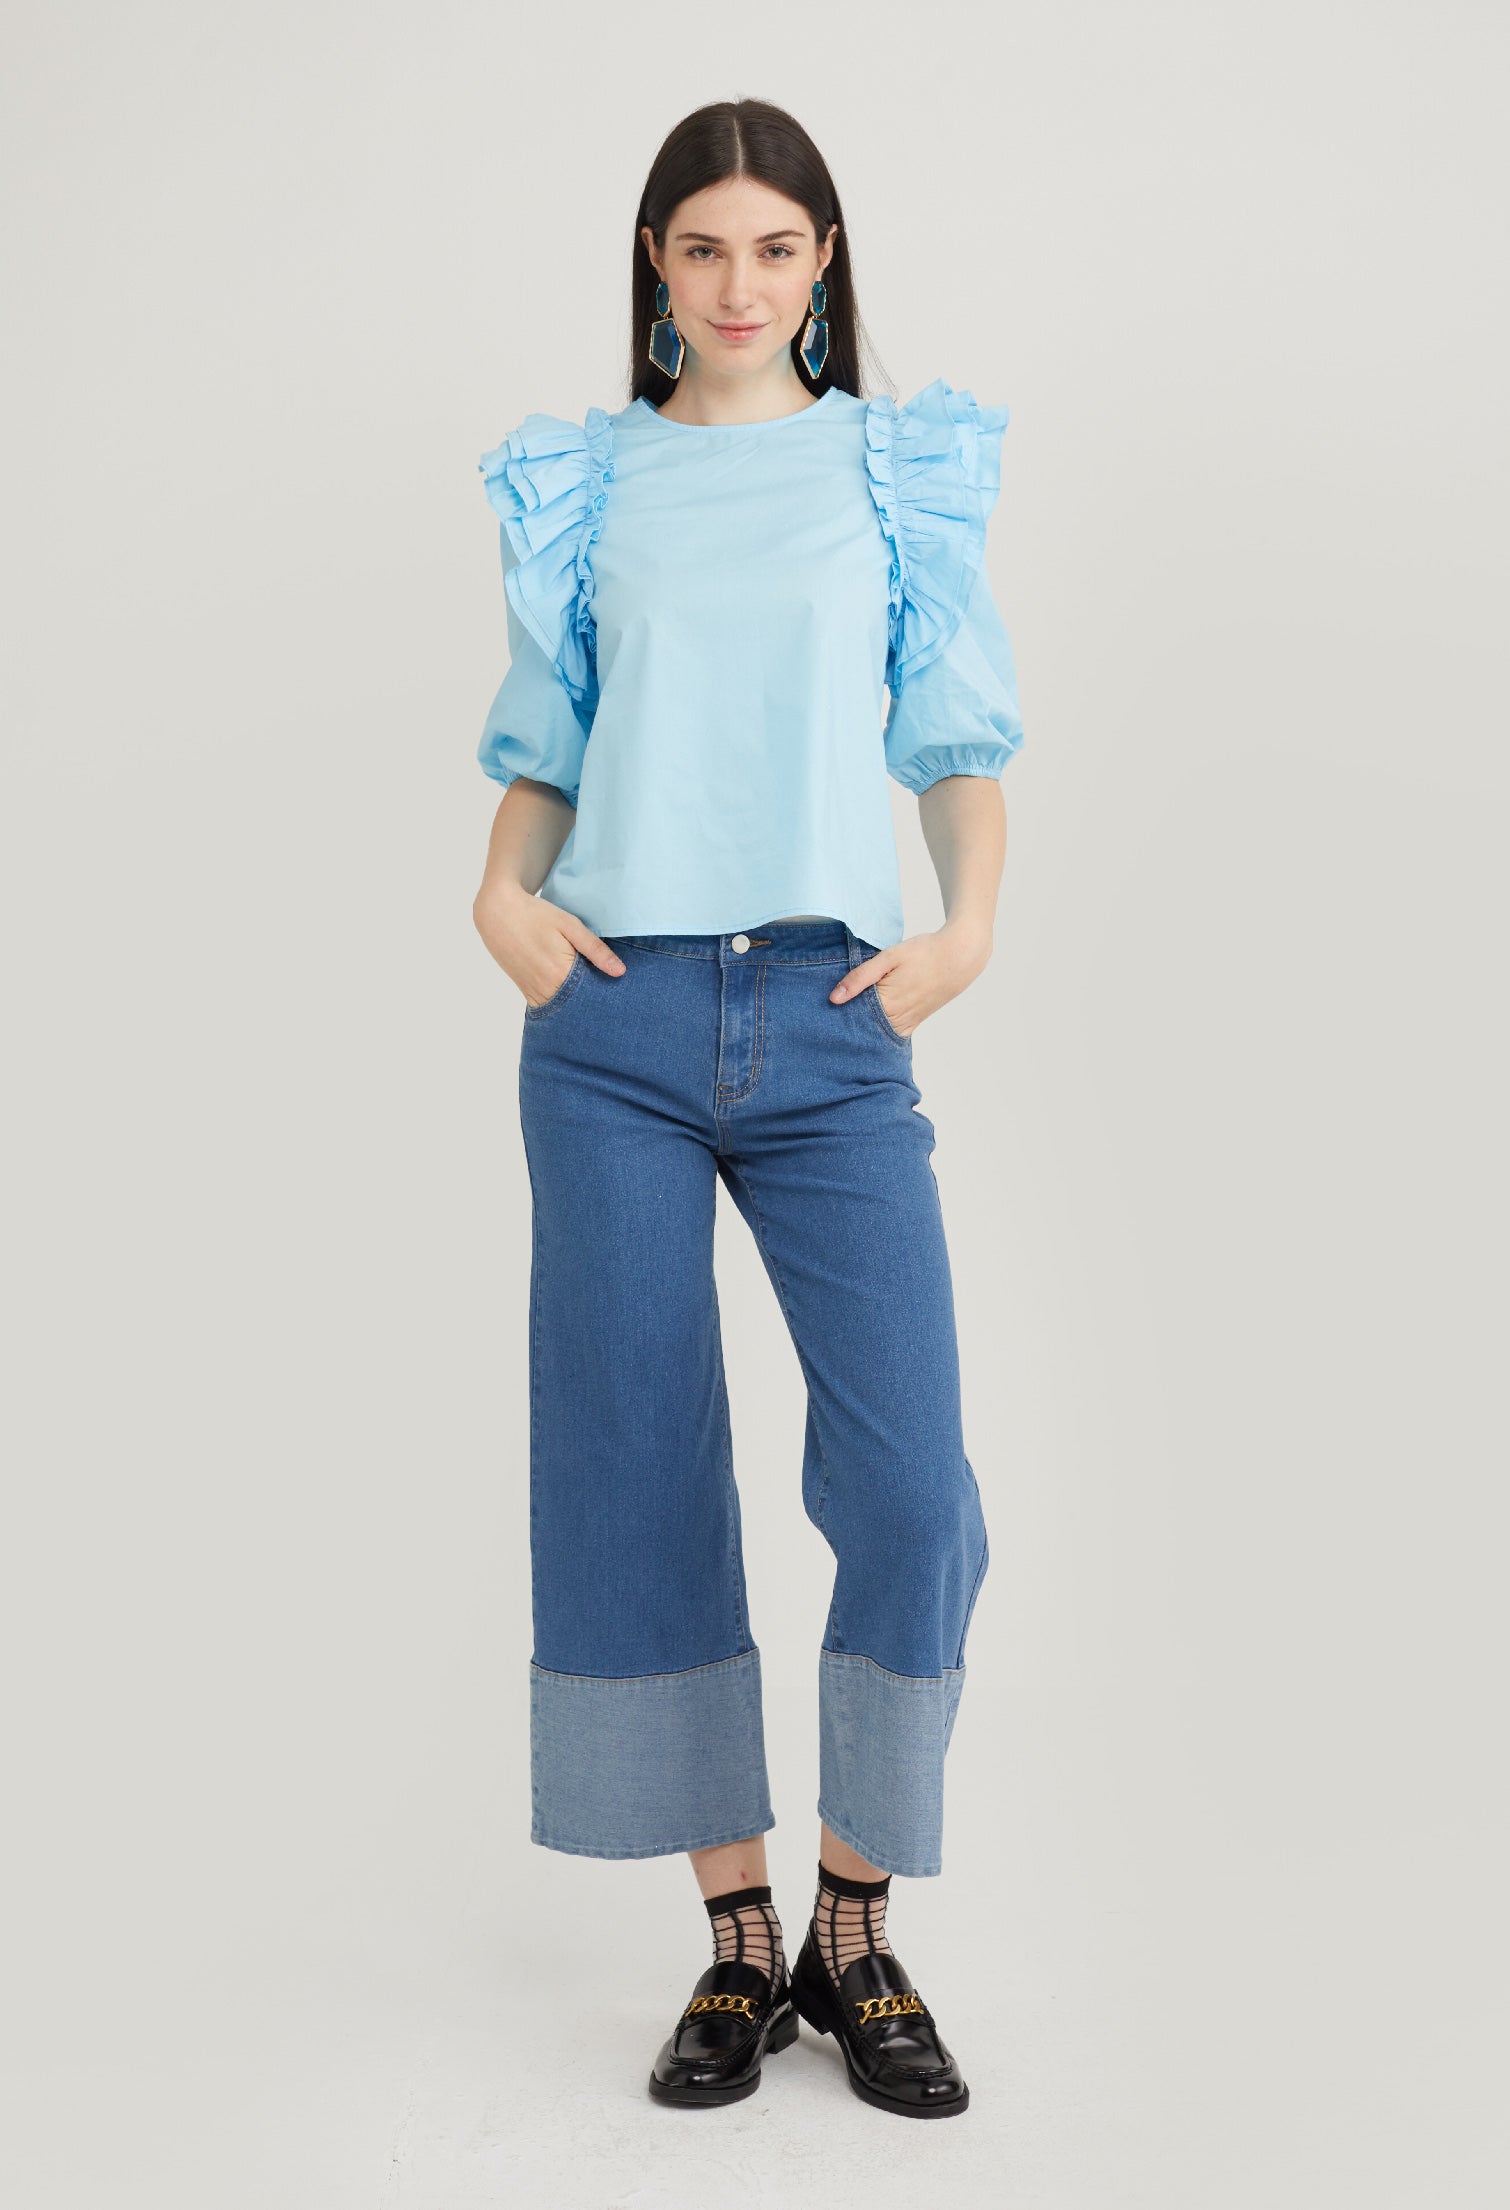 Ruffle Accent 3/4 Sleeve Blouse